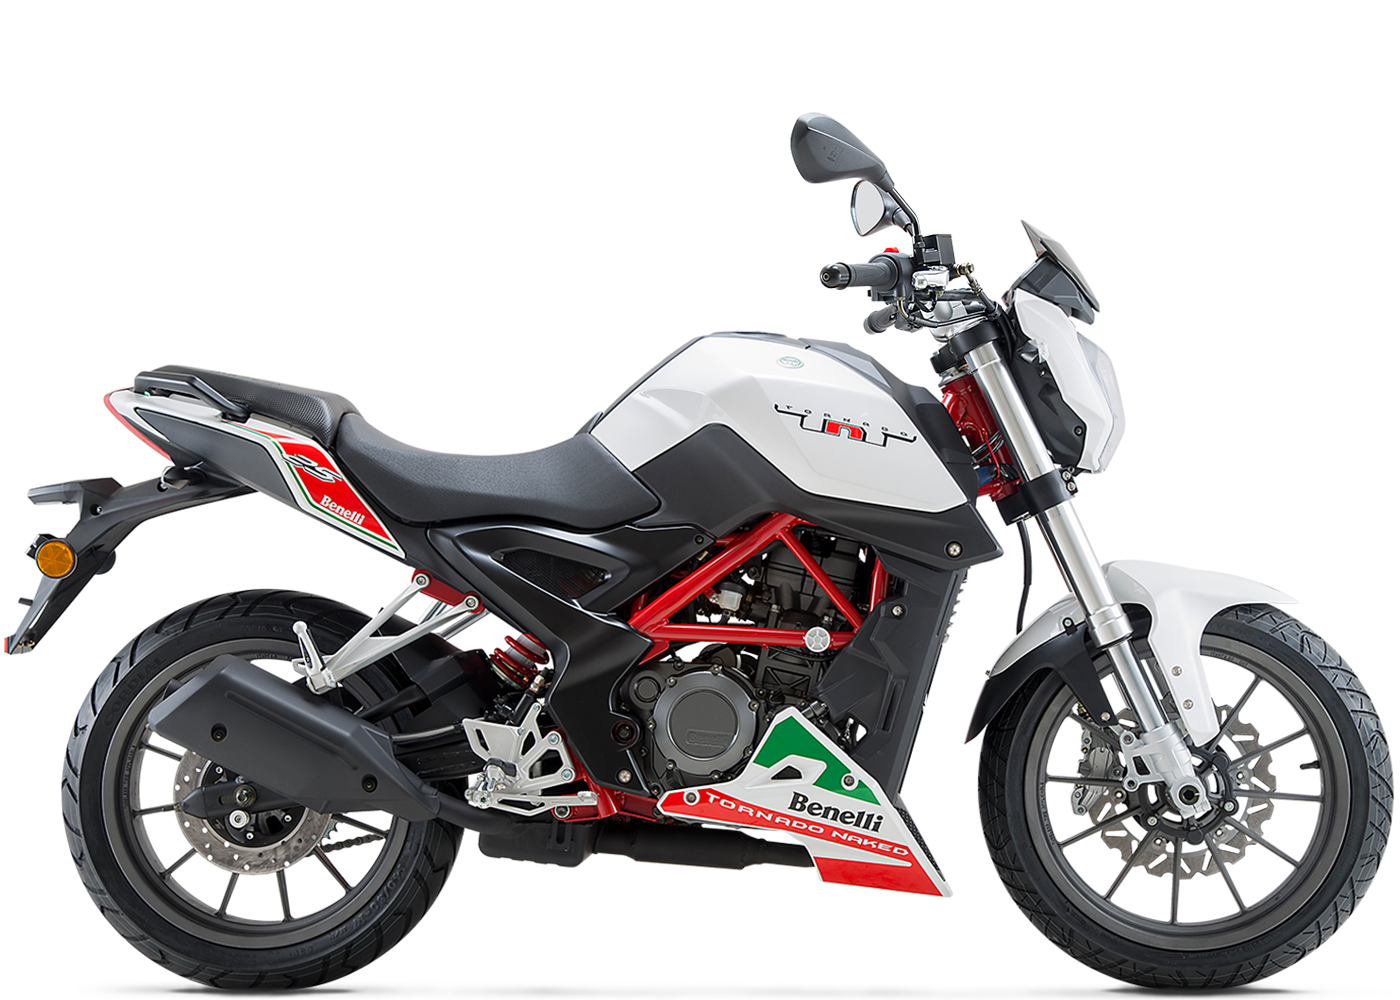 TNT 25 - Benelli Q.J. | Motorcycles and scooters